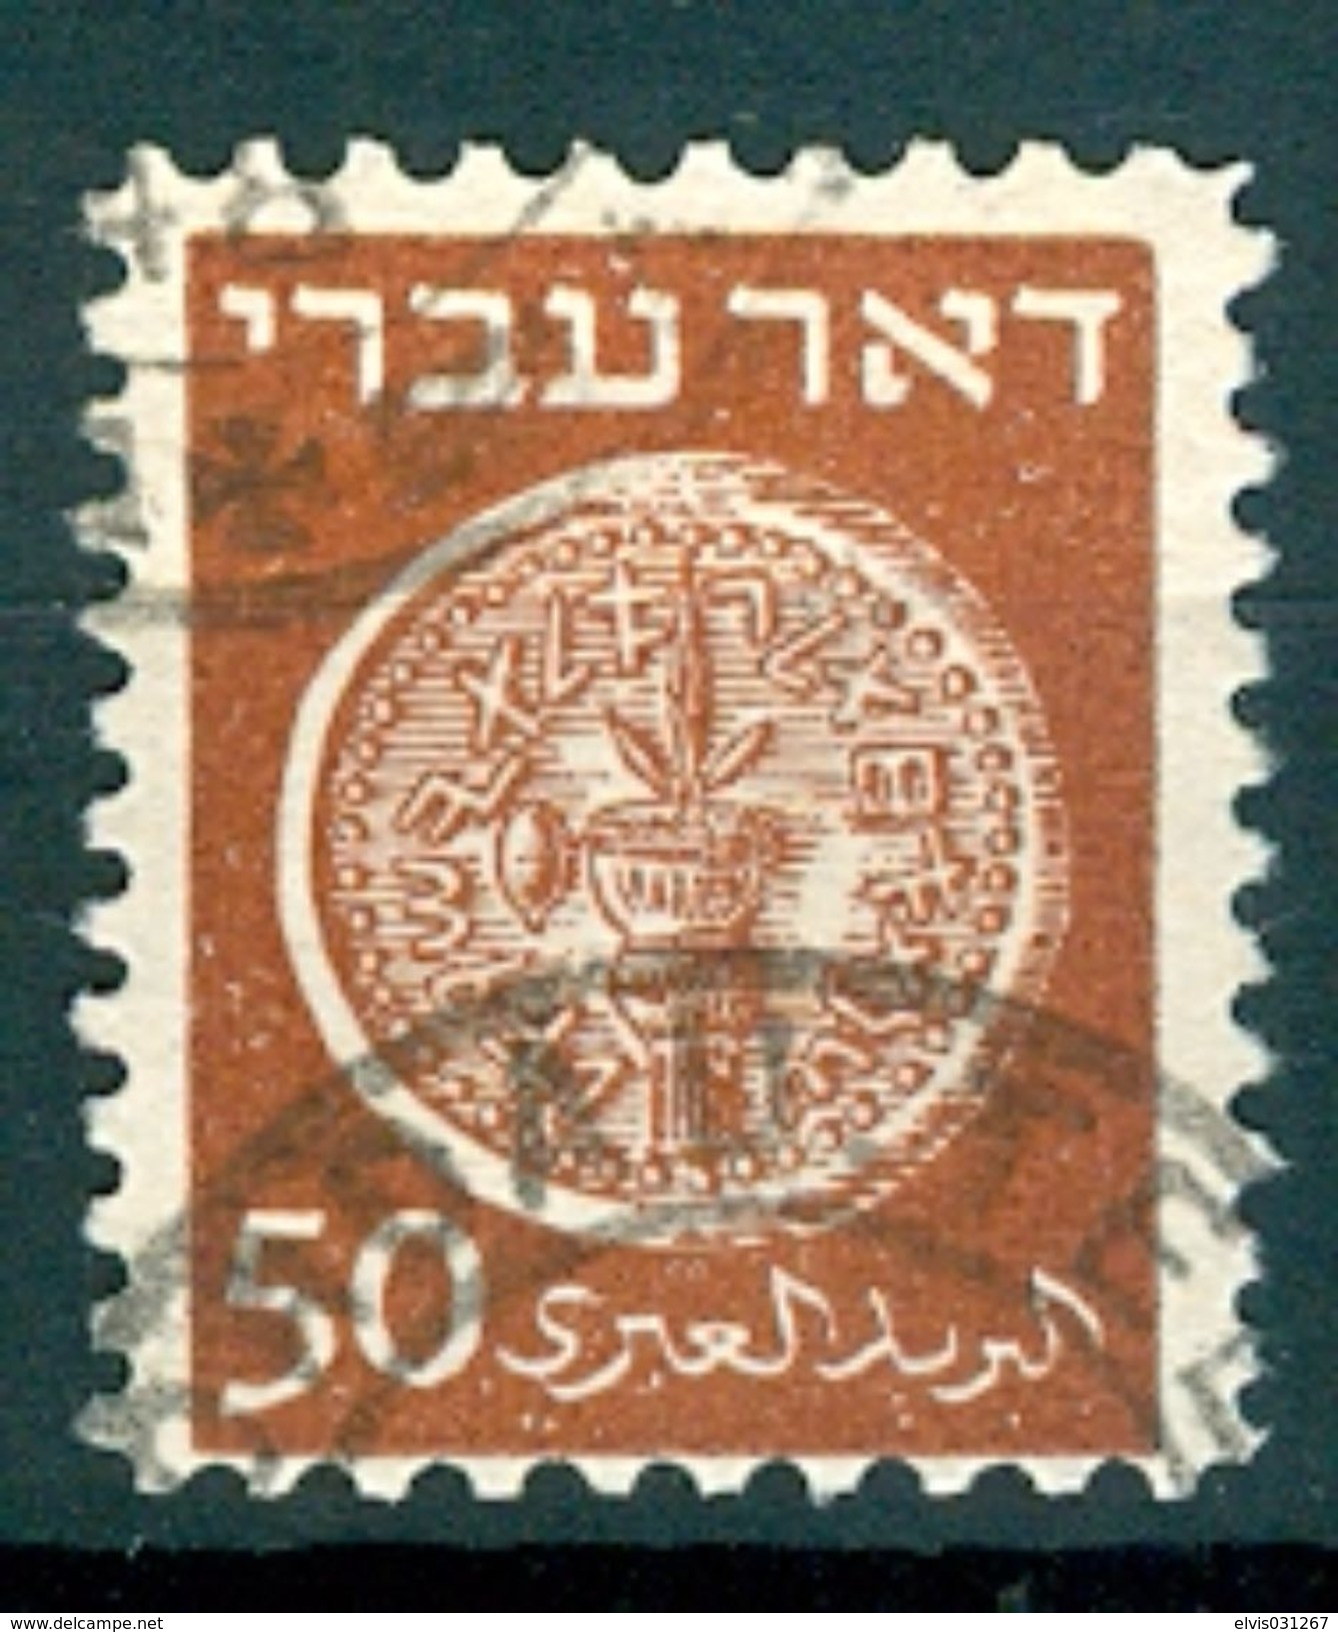 Israel - 1948, Michel/Philex No. : 6, Perf: 10/11 !!! - DOAR IVRI - 1st Coins - USED - *** - No Tab - Unused Stamps (without Tabs)